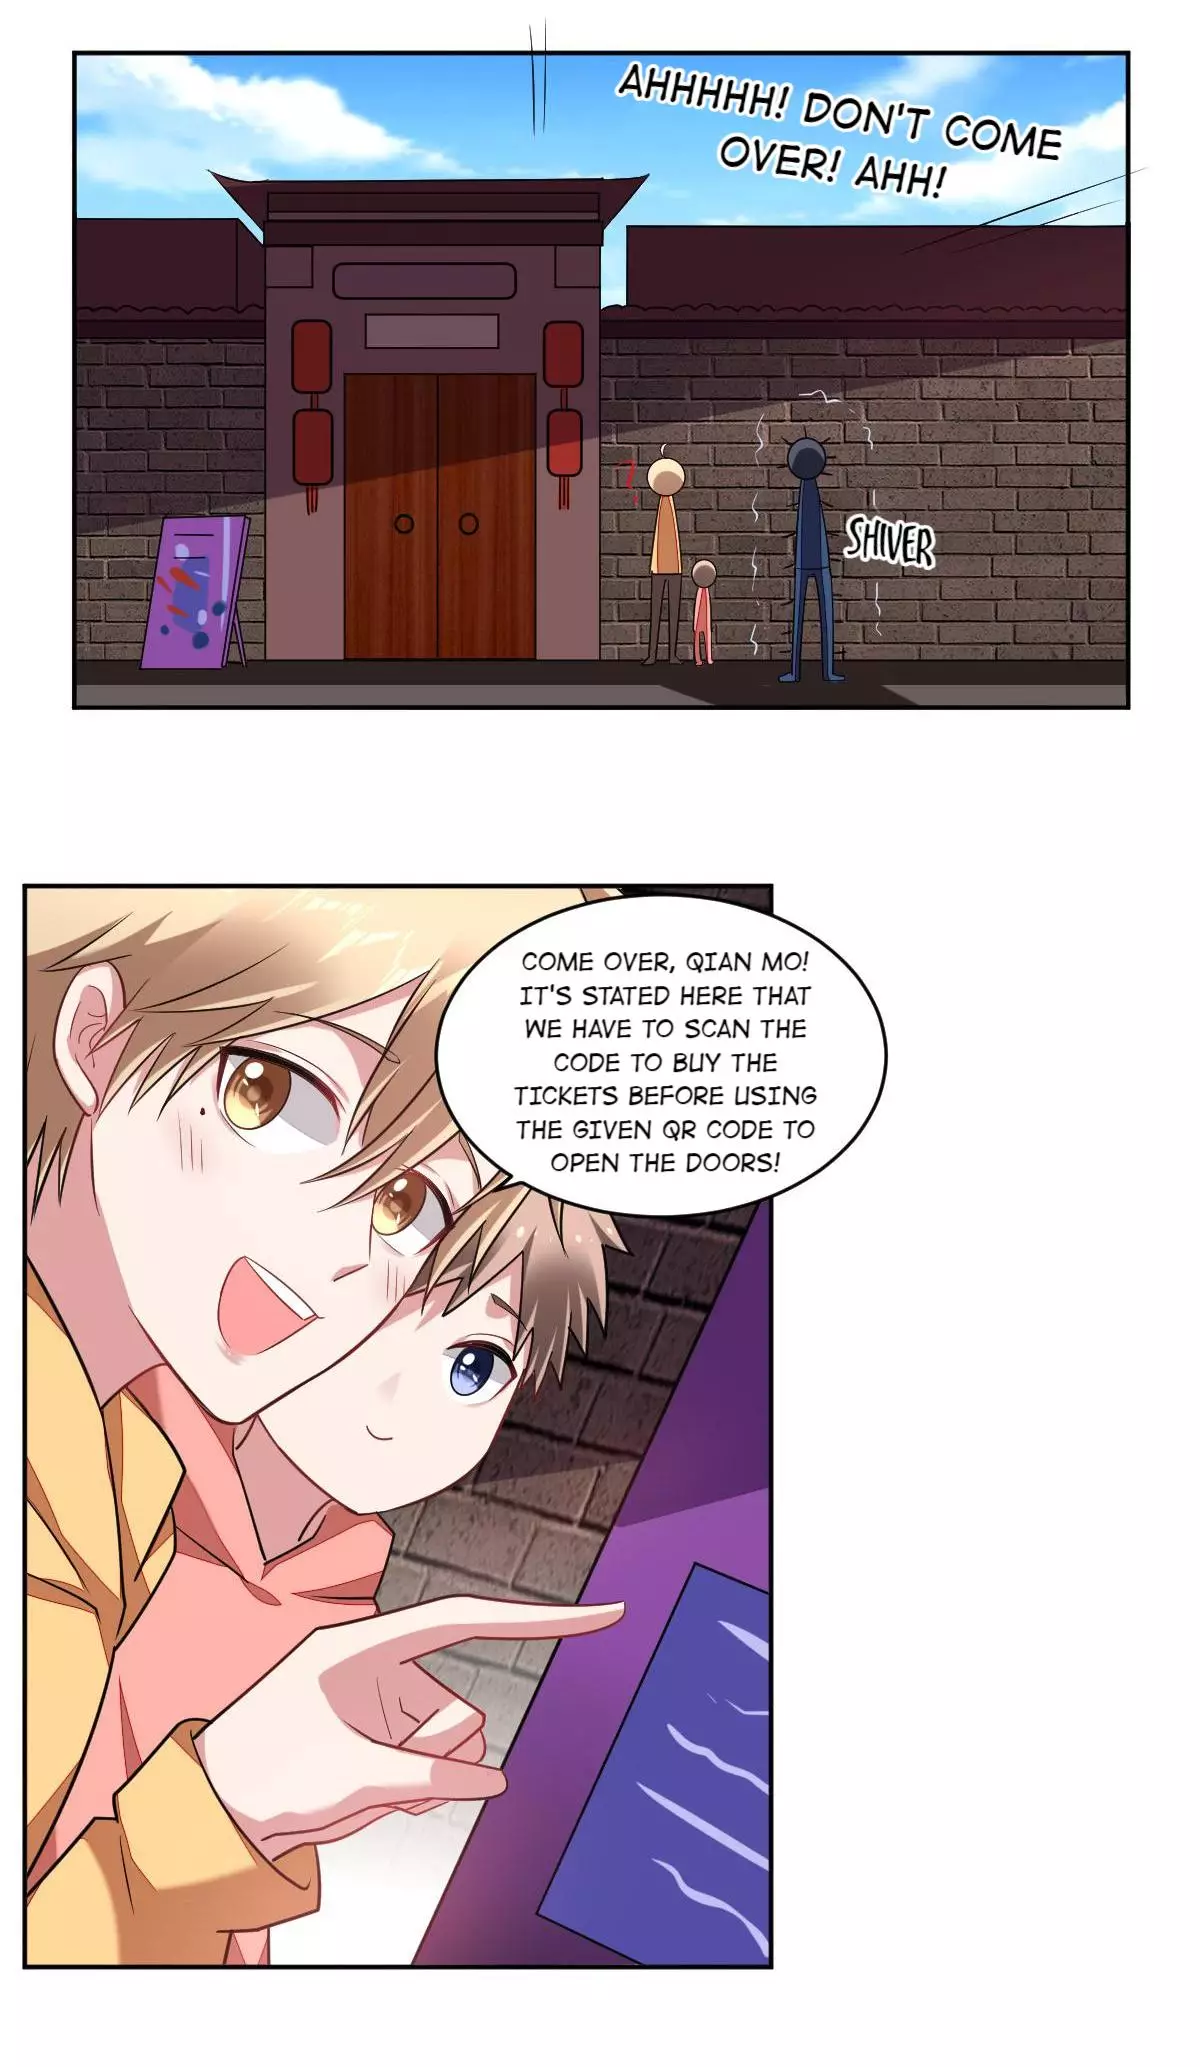 No Rejection Allowed - 119 page 2-8f7b7c97